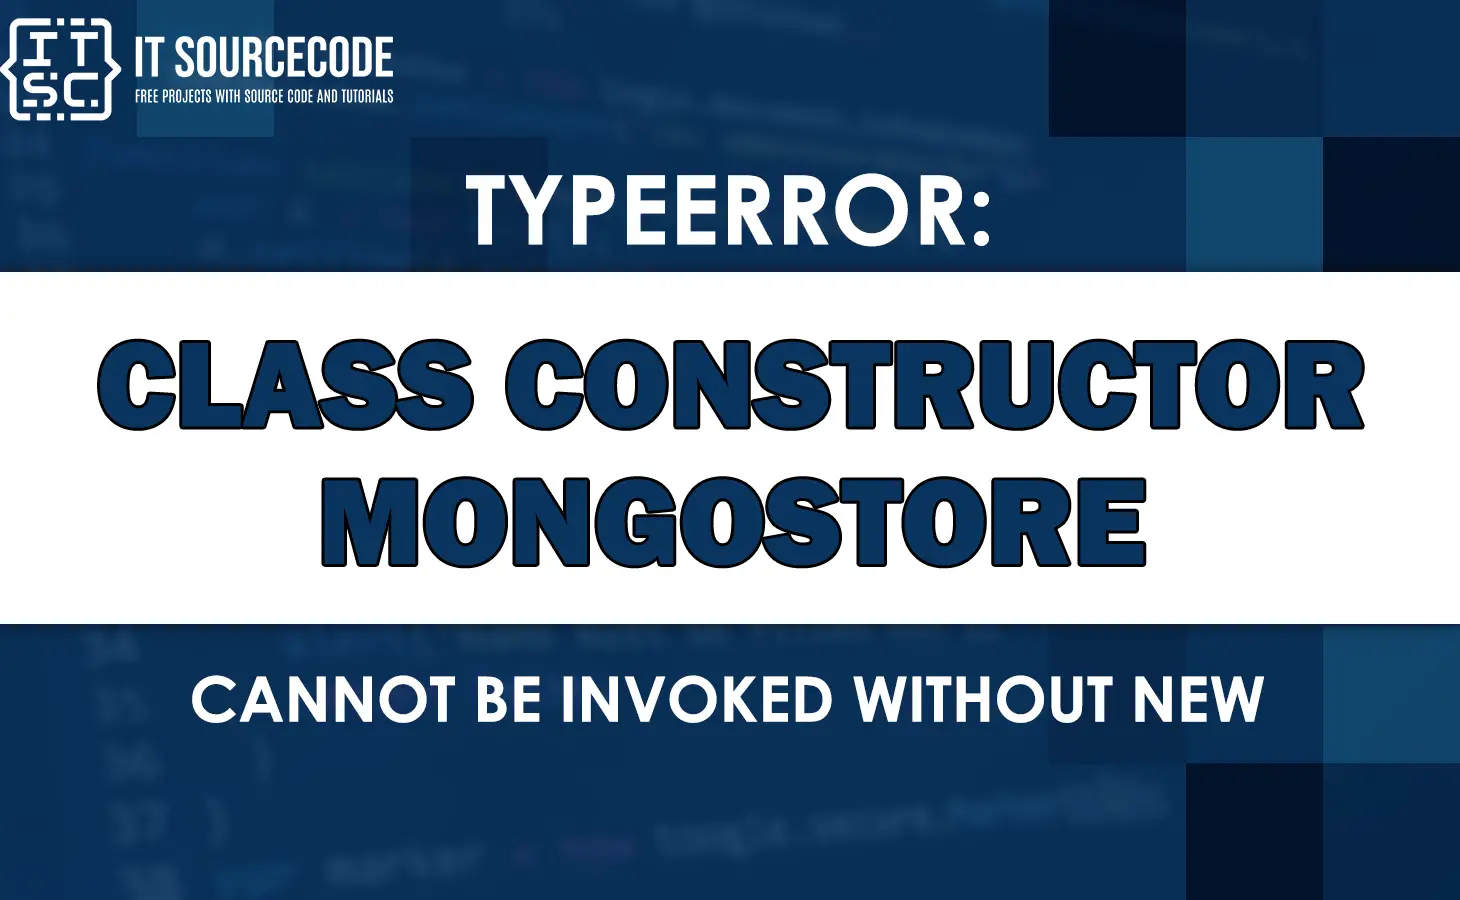 Typeerror: class constructor mongostore cannot be invoked without new